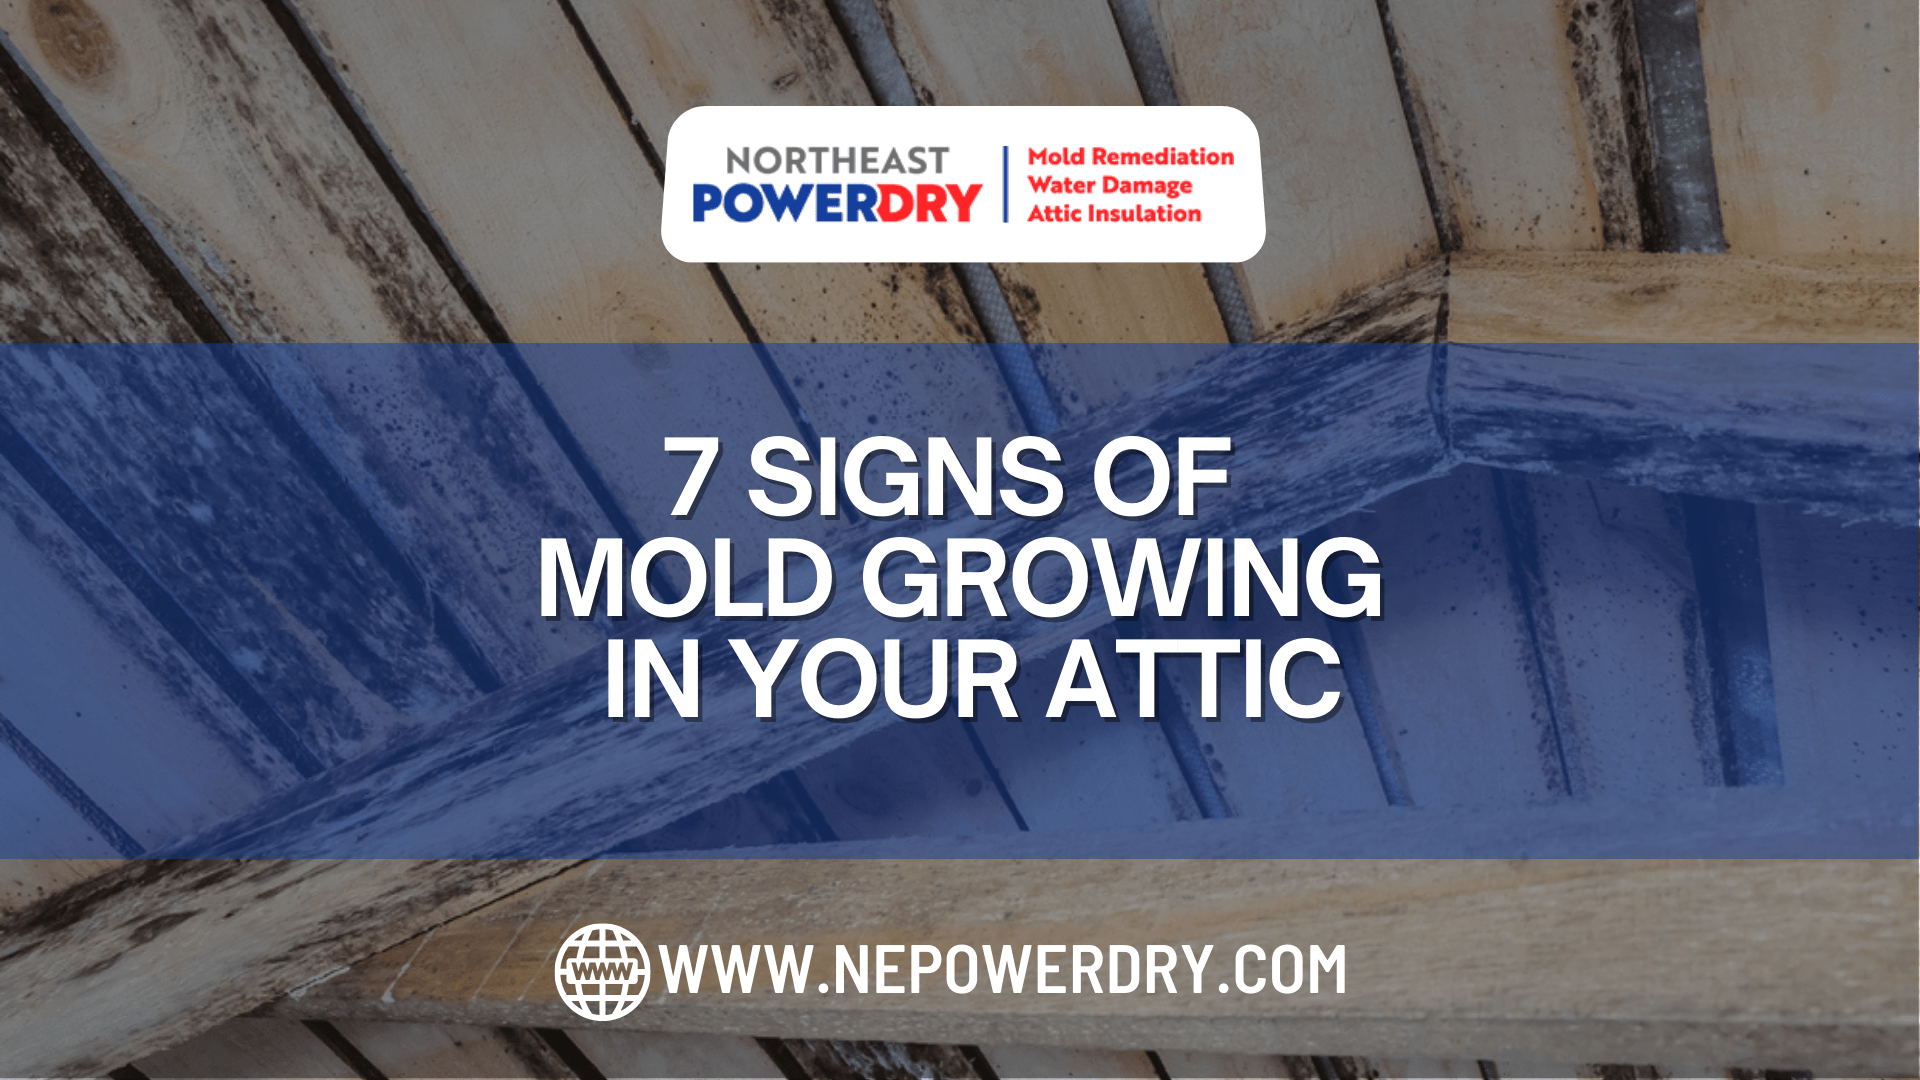 7 Signs of Mold Growing in your Attic